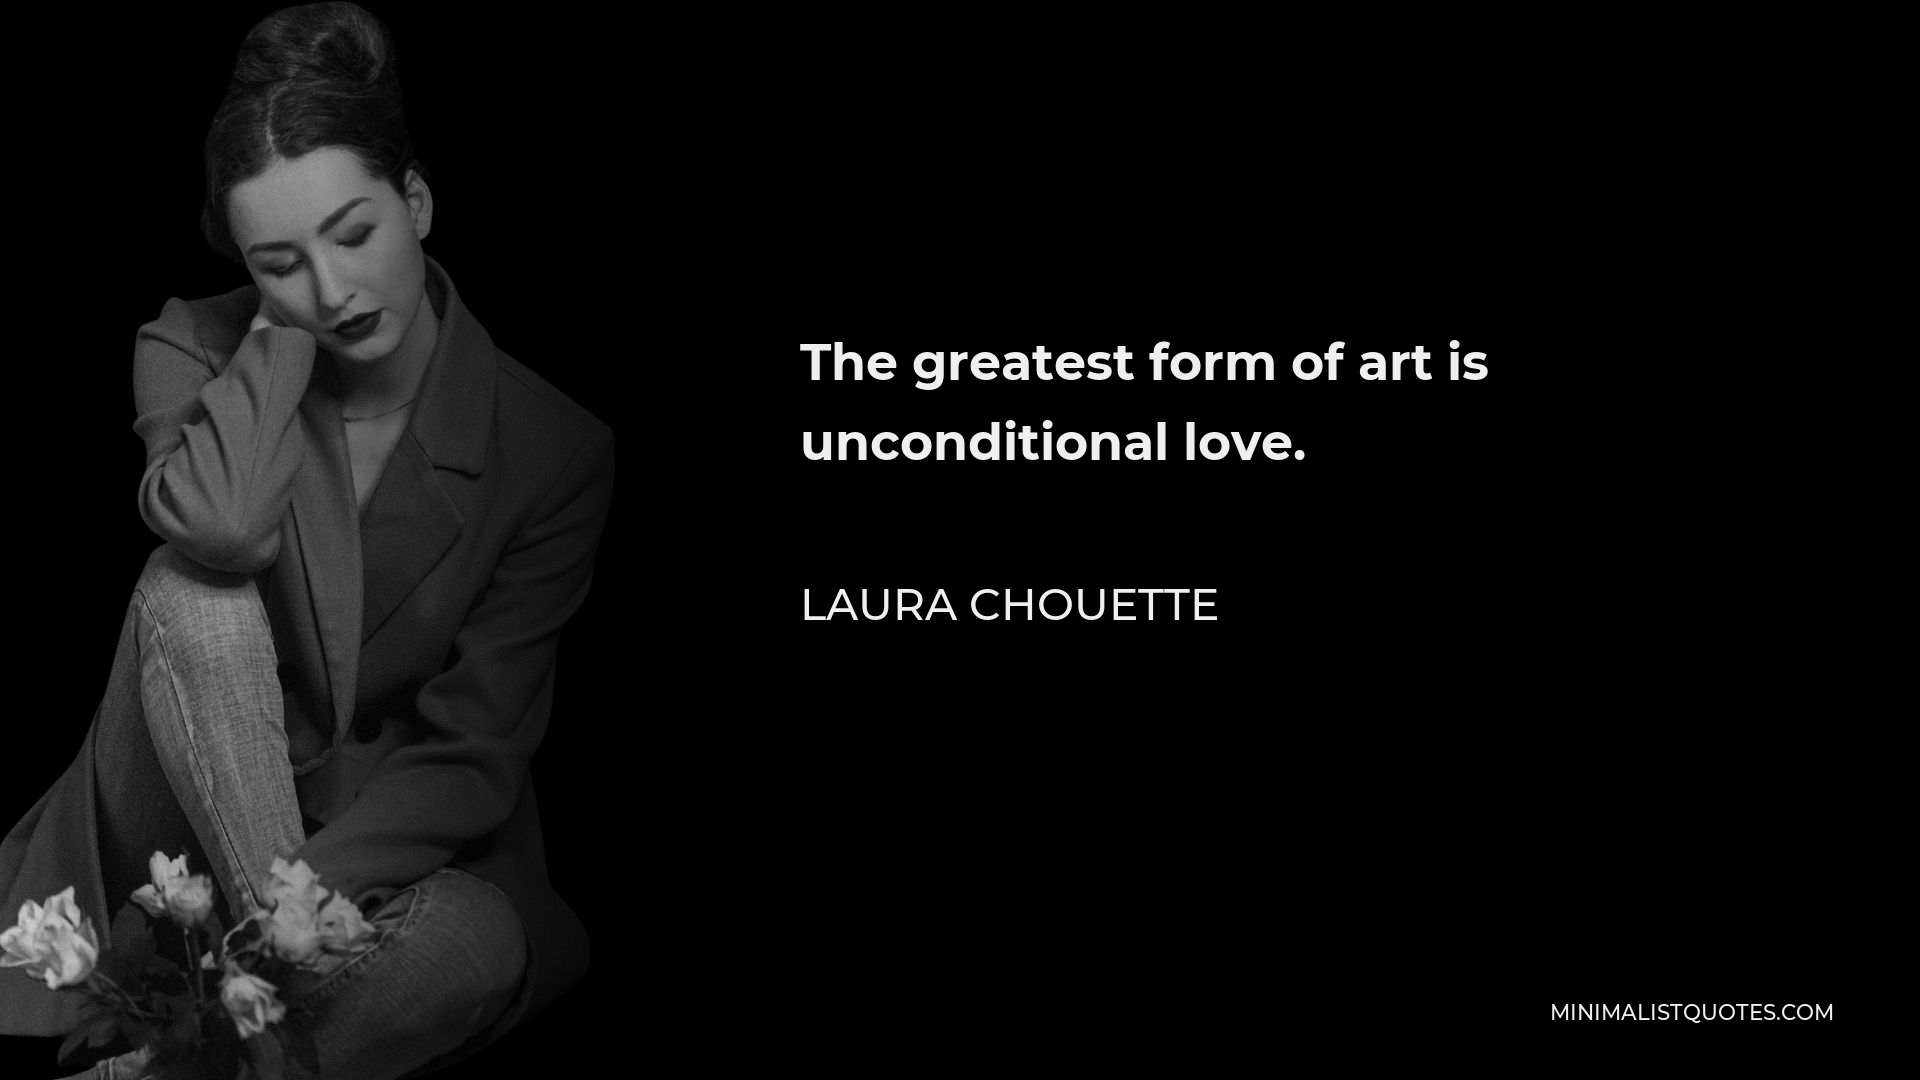 Laura Chouette Quote - The greatest form of art is unconditional love.